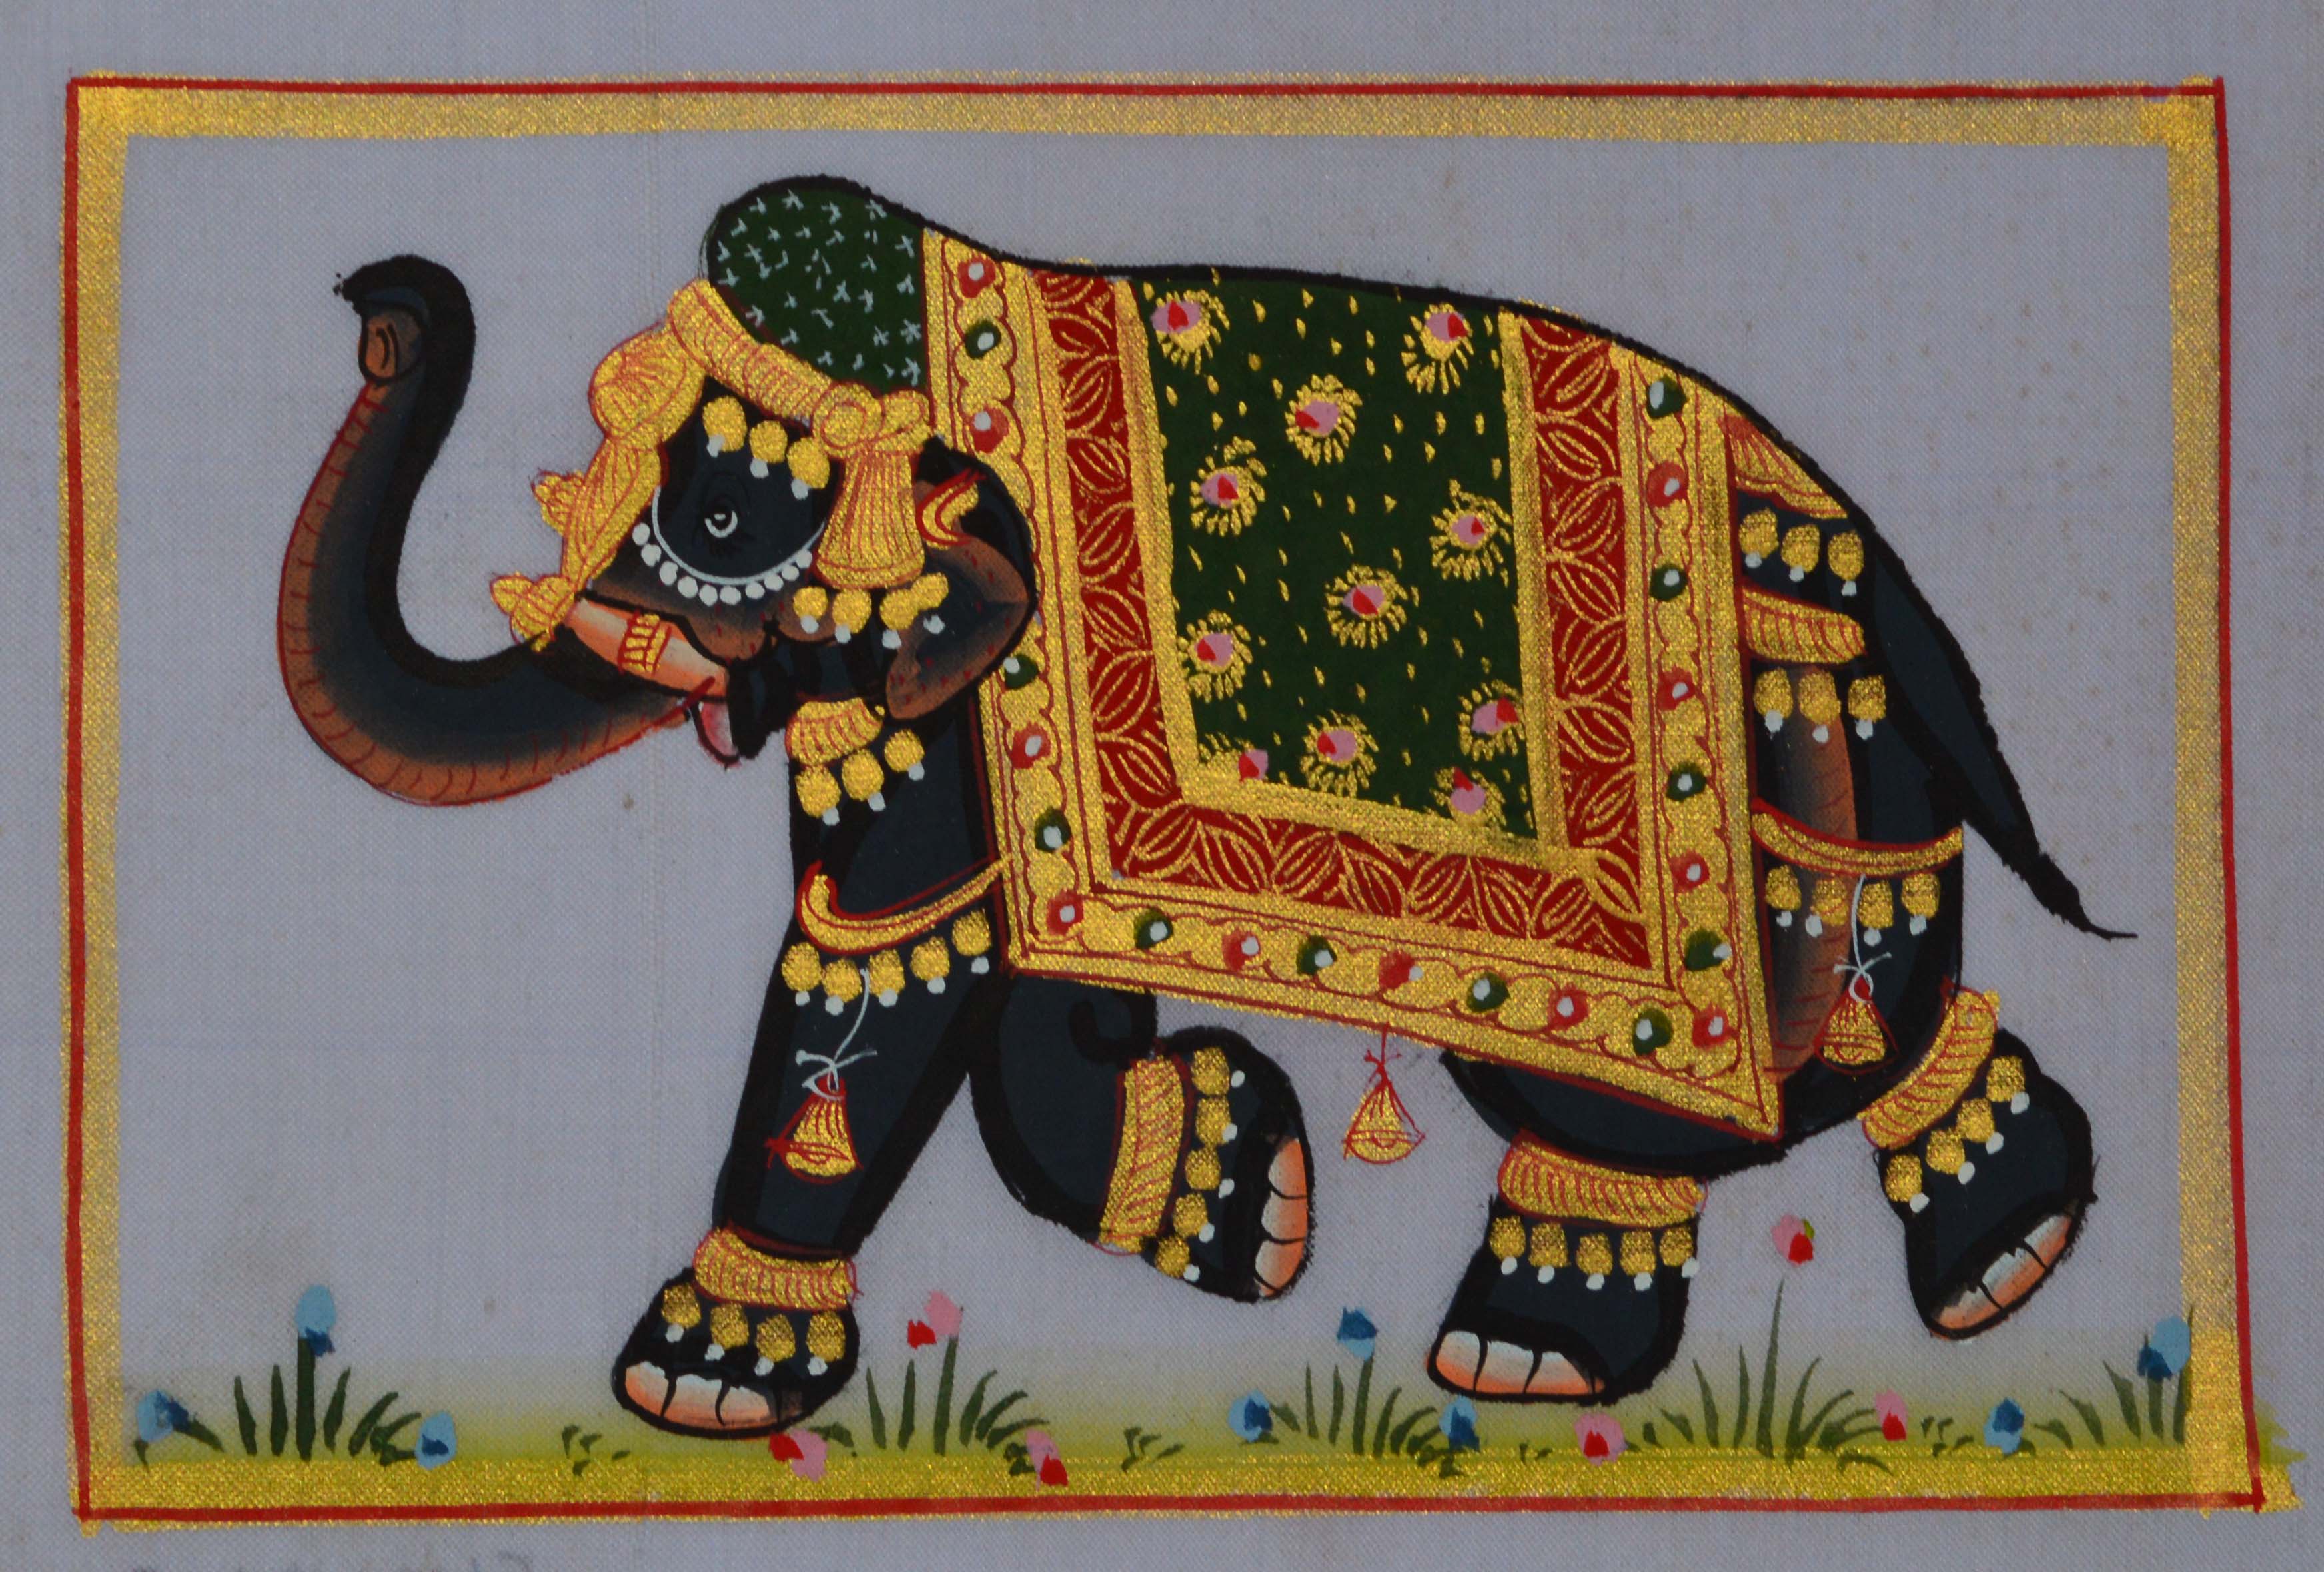 Royal Elephant decorated with Gold Ornaments on Canvas Original Art Silk Painting